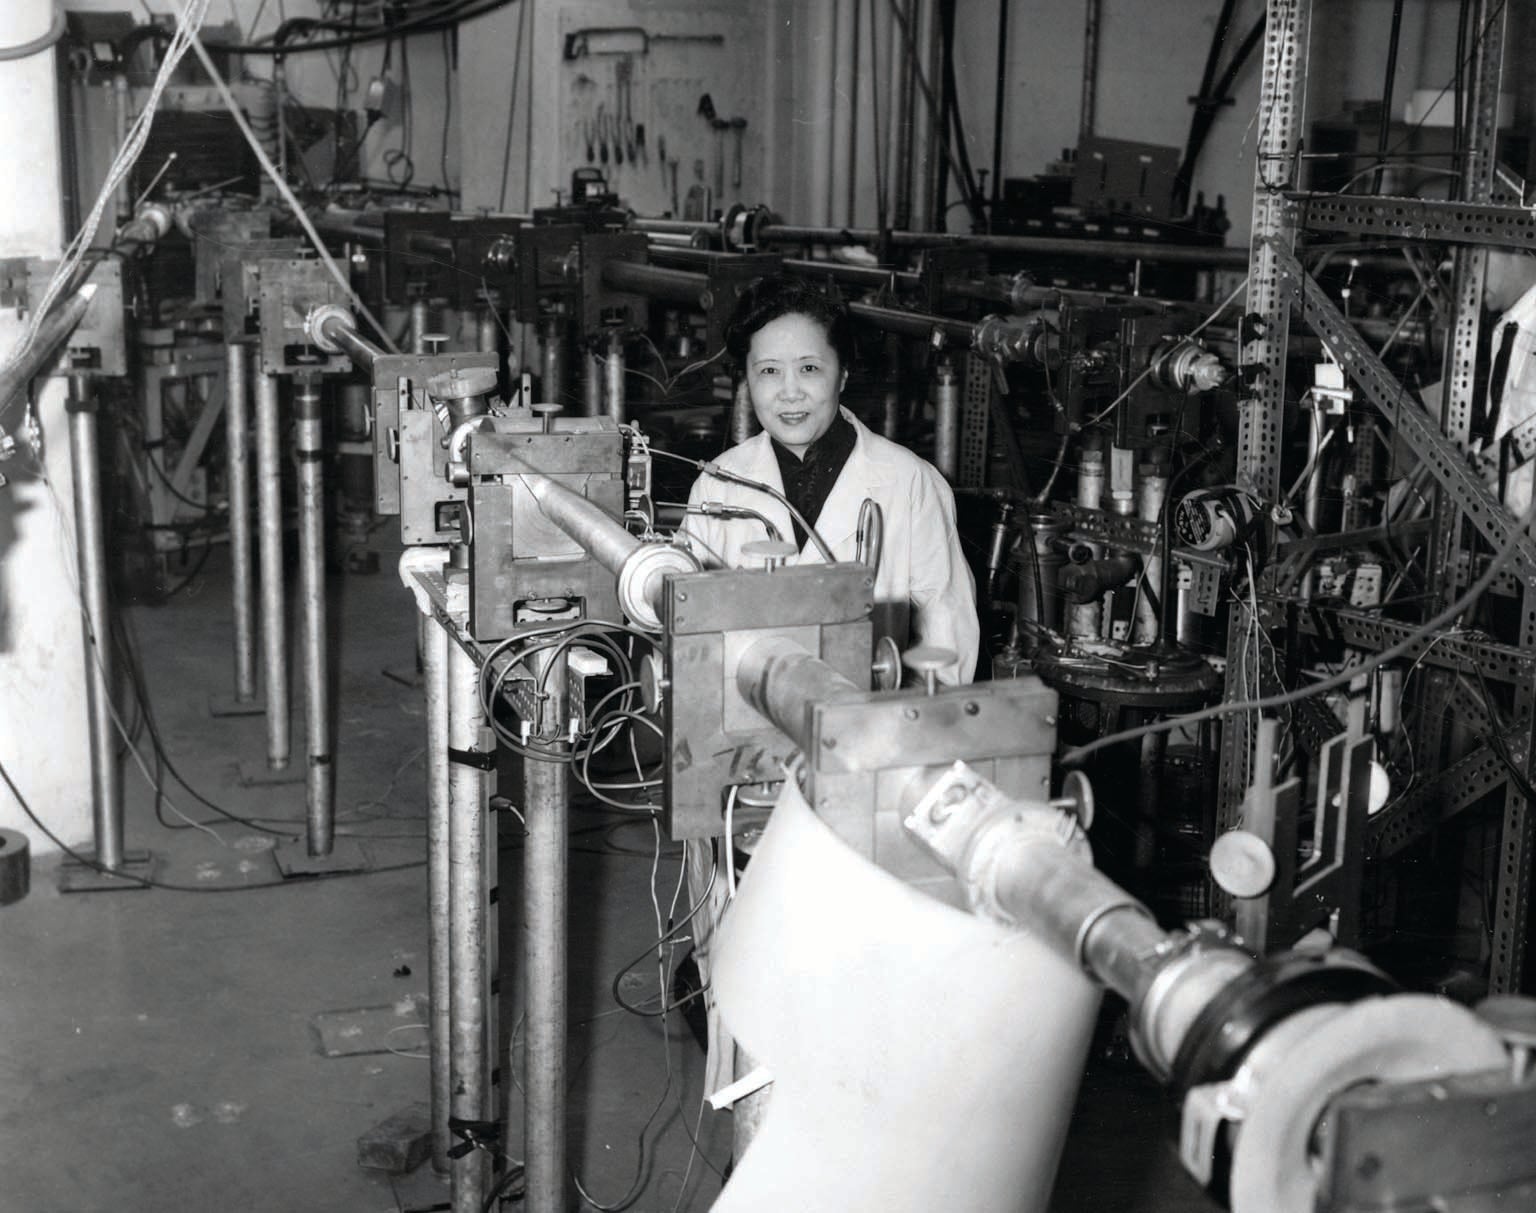 Chien-Shiung Wu shown in room with industrial scientific equipment.